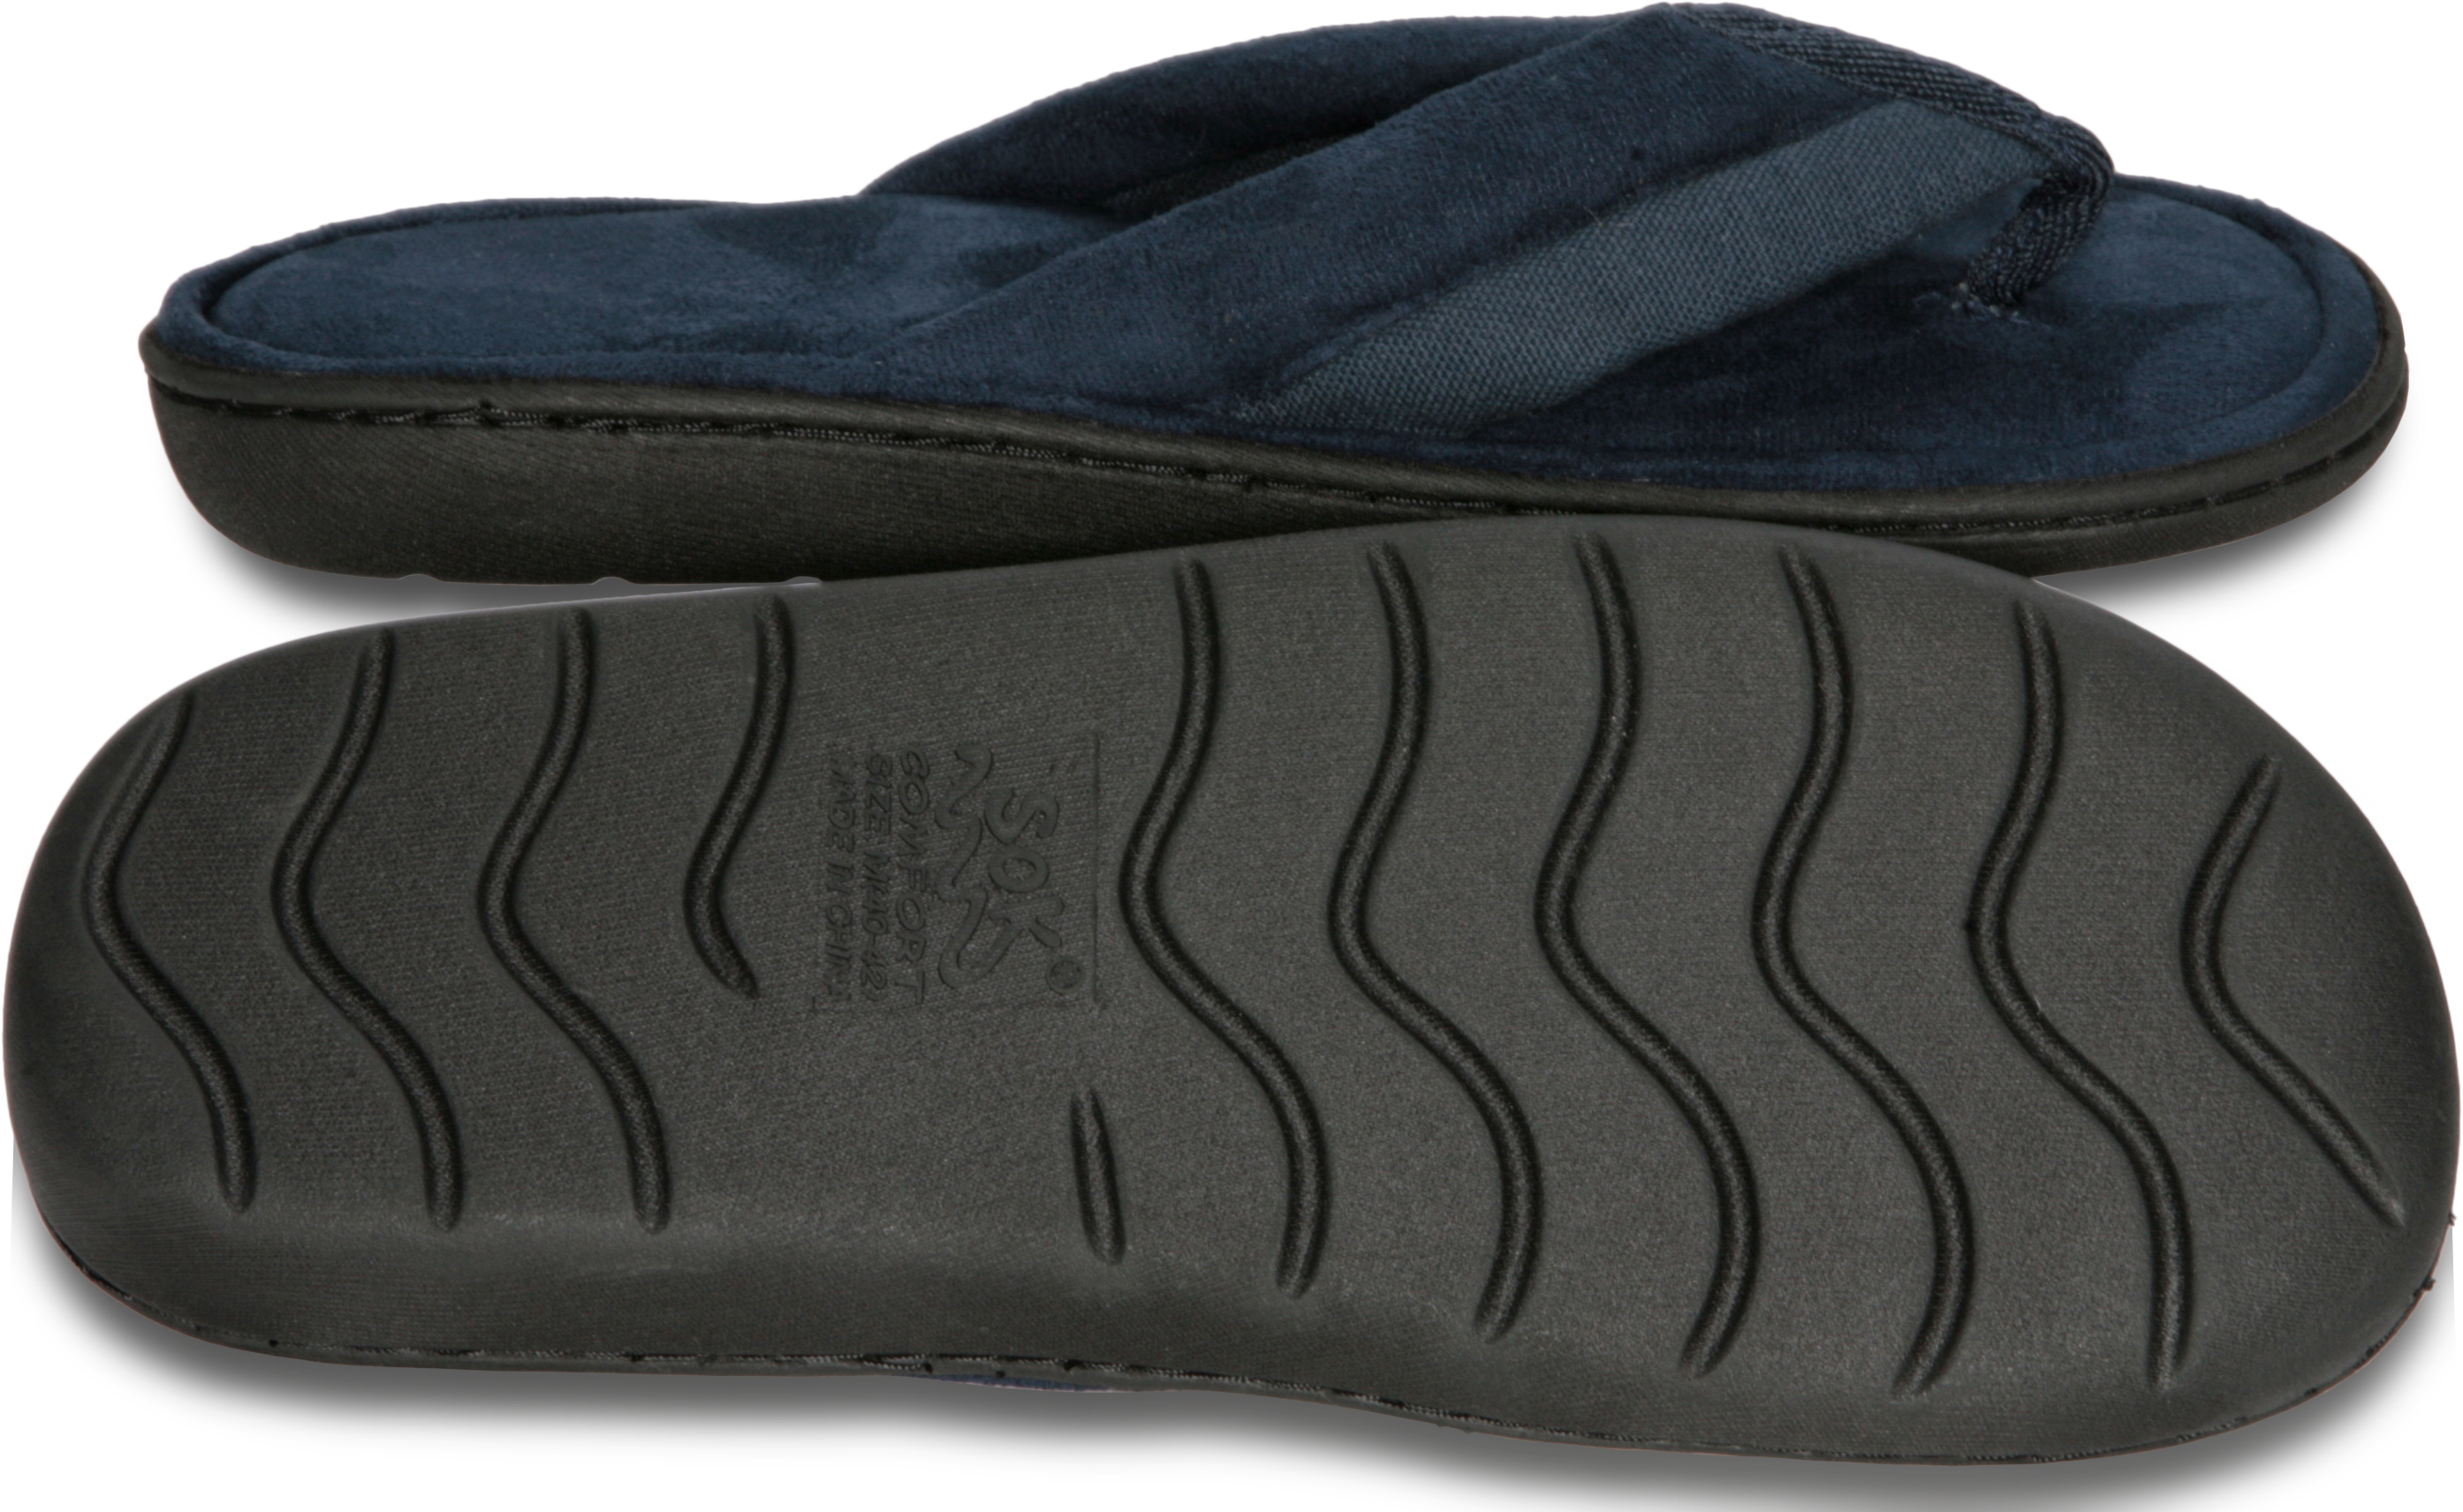 Deluxe Comfort Mens Memory Foam Slipper, Size 11-12 - Soft Linen 120D SBR Insole & Rubber Outsole - Pure Suede Shoes - Non Marking Sole - Mens Slippers, Blue - image 3 of 4